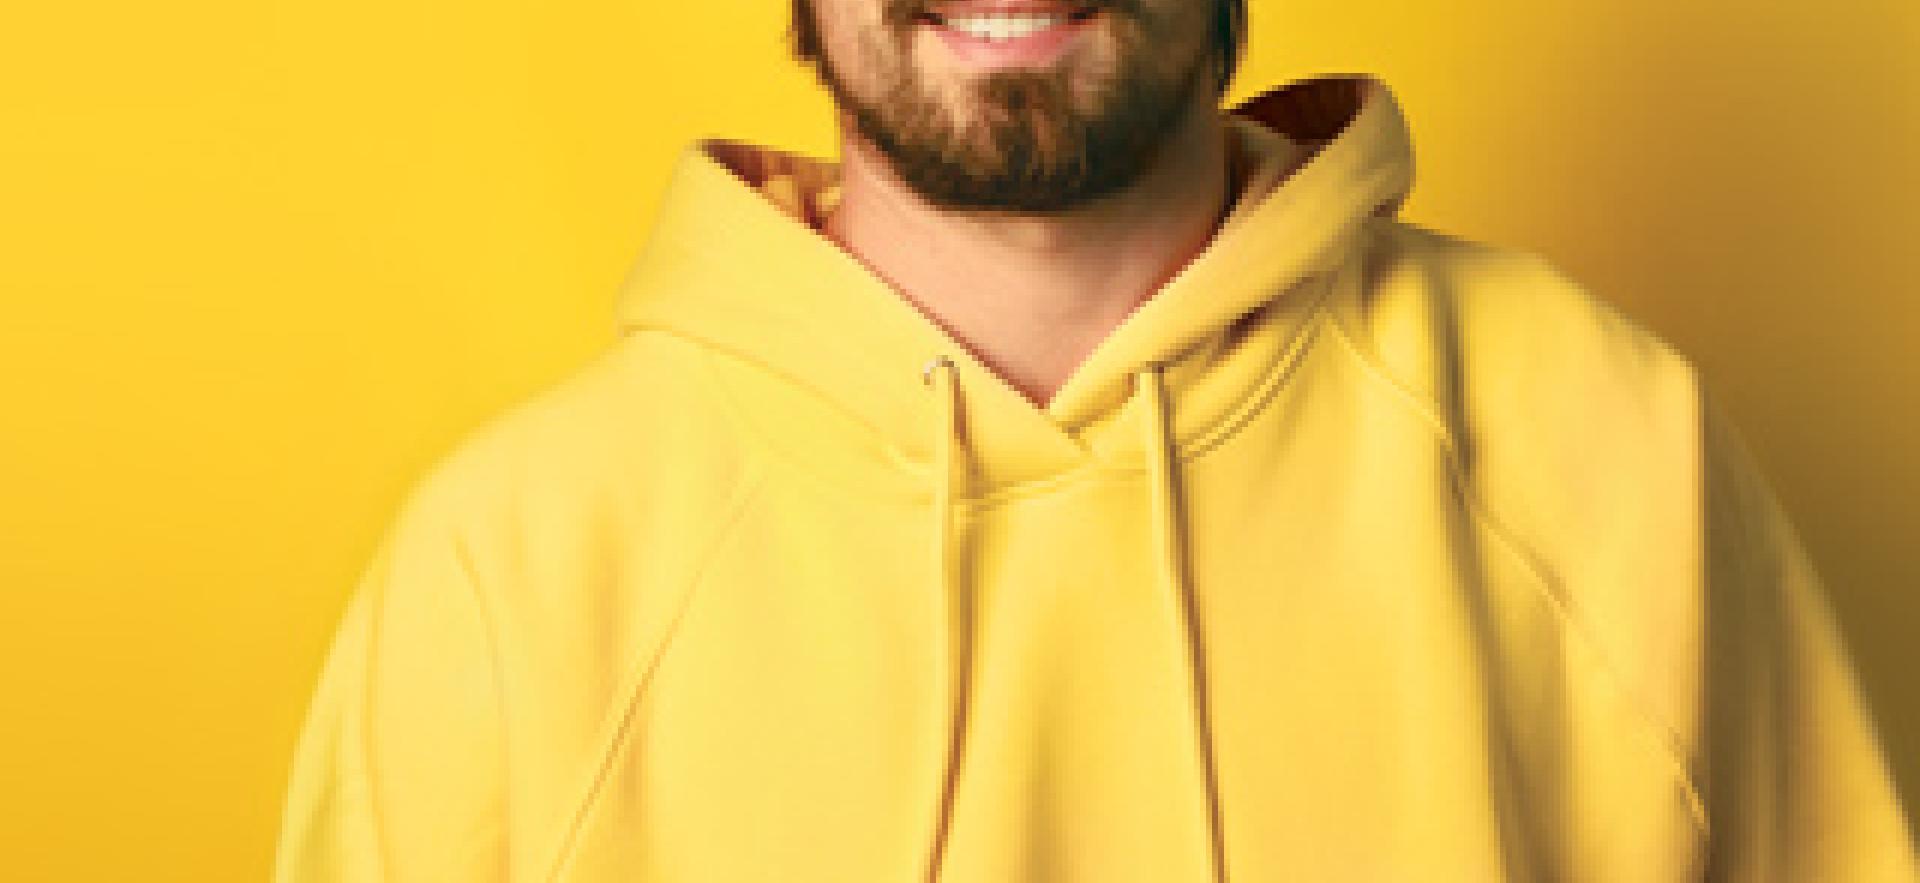 Deep Dive image with student in yellow hoodie with yellow background smiling at camera with text THEIR TIME TO BE